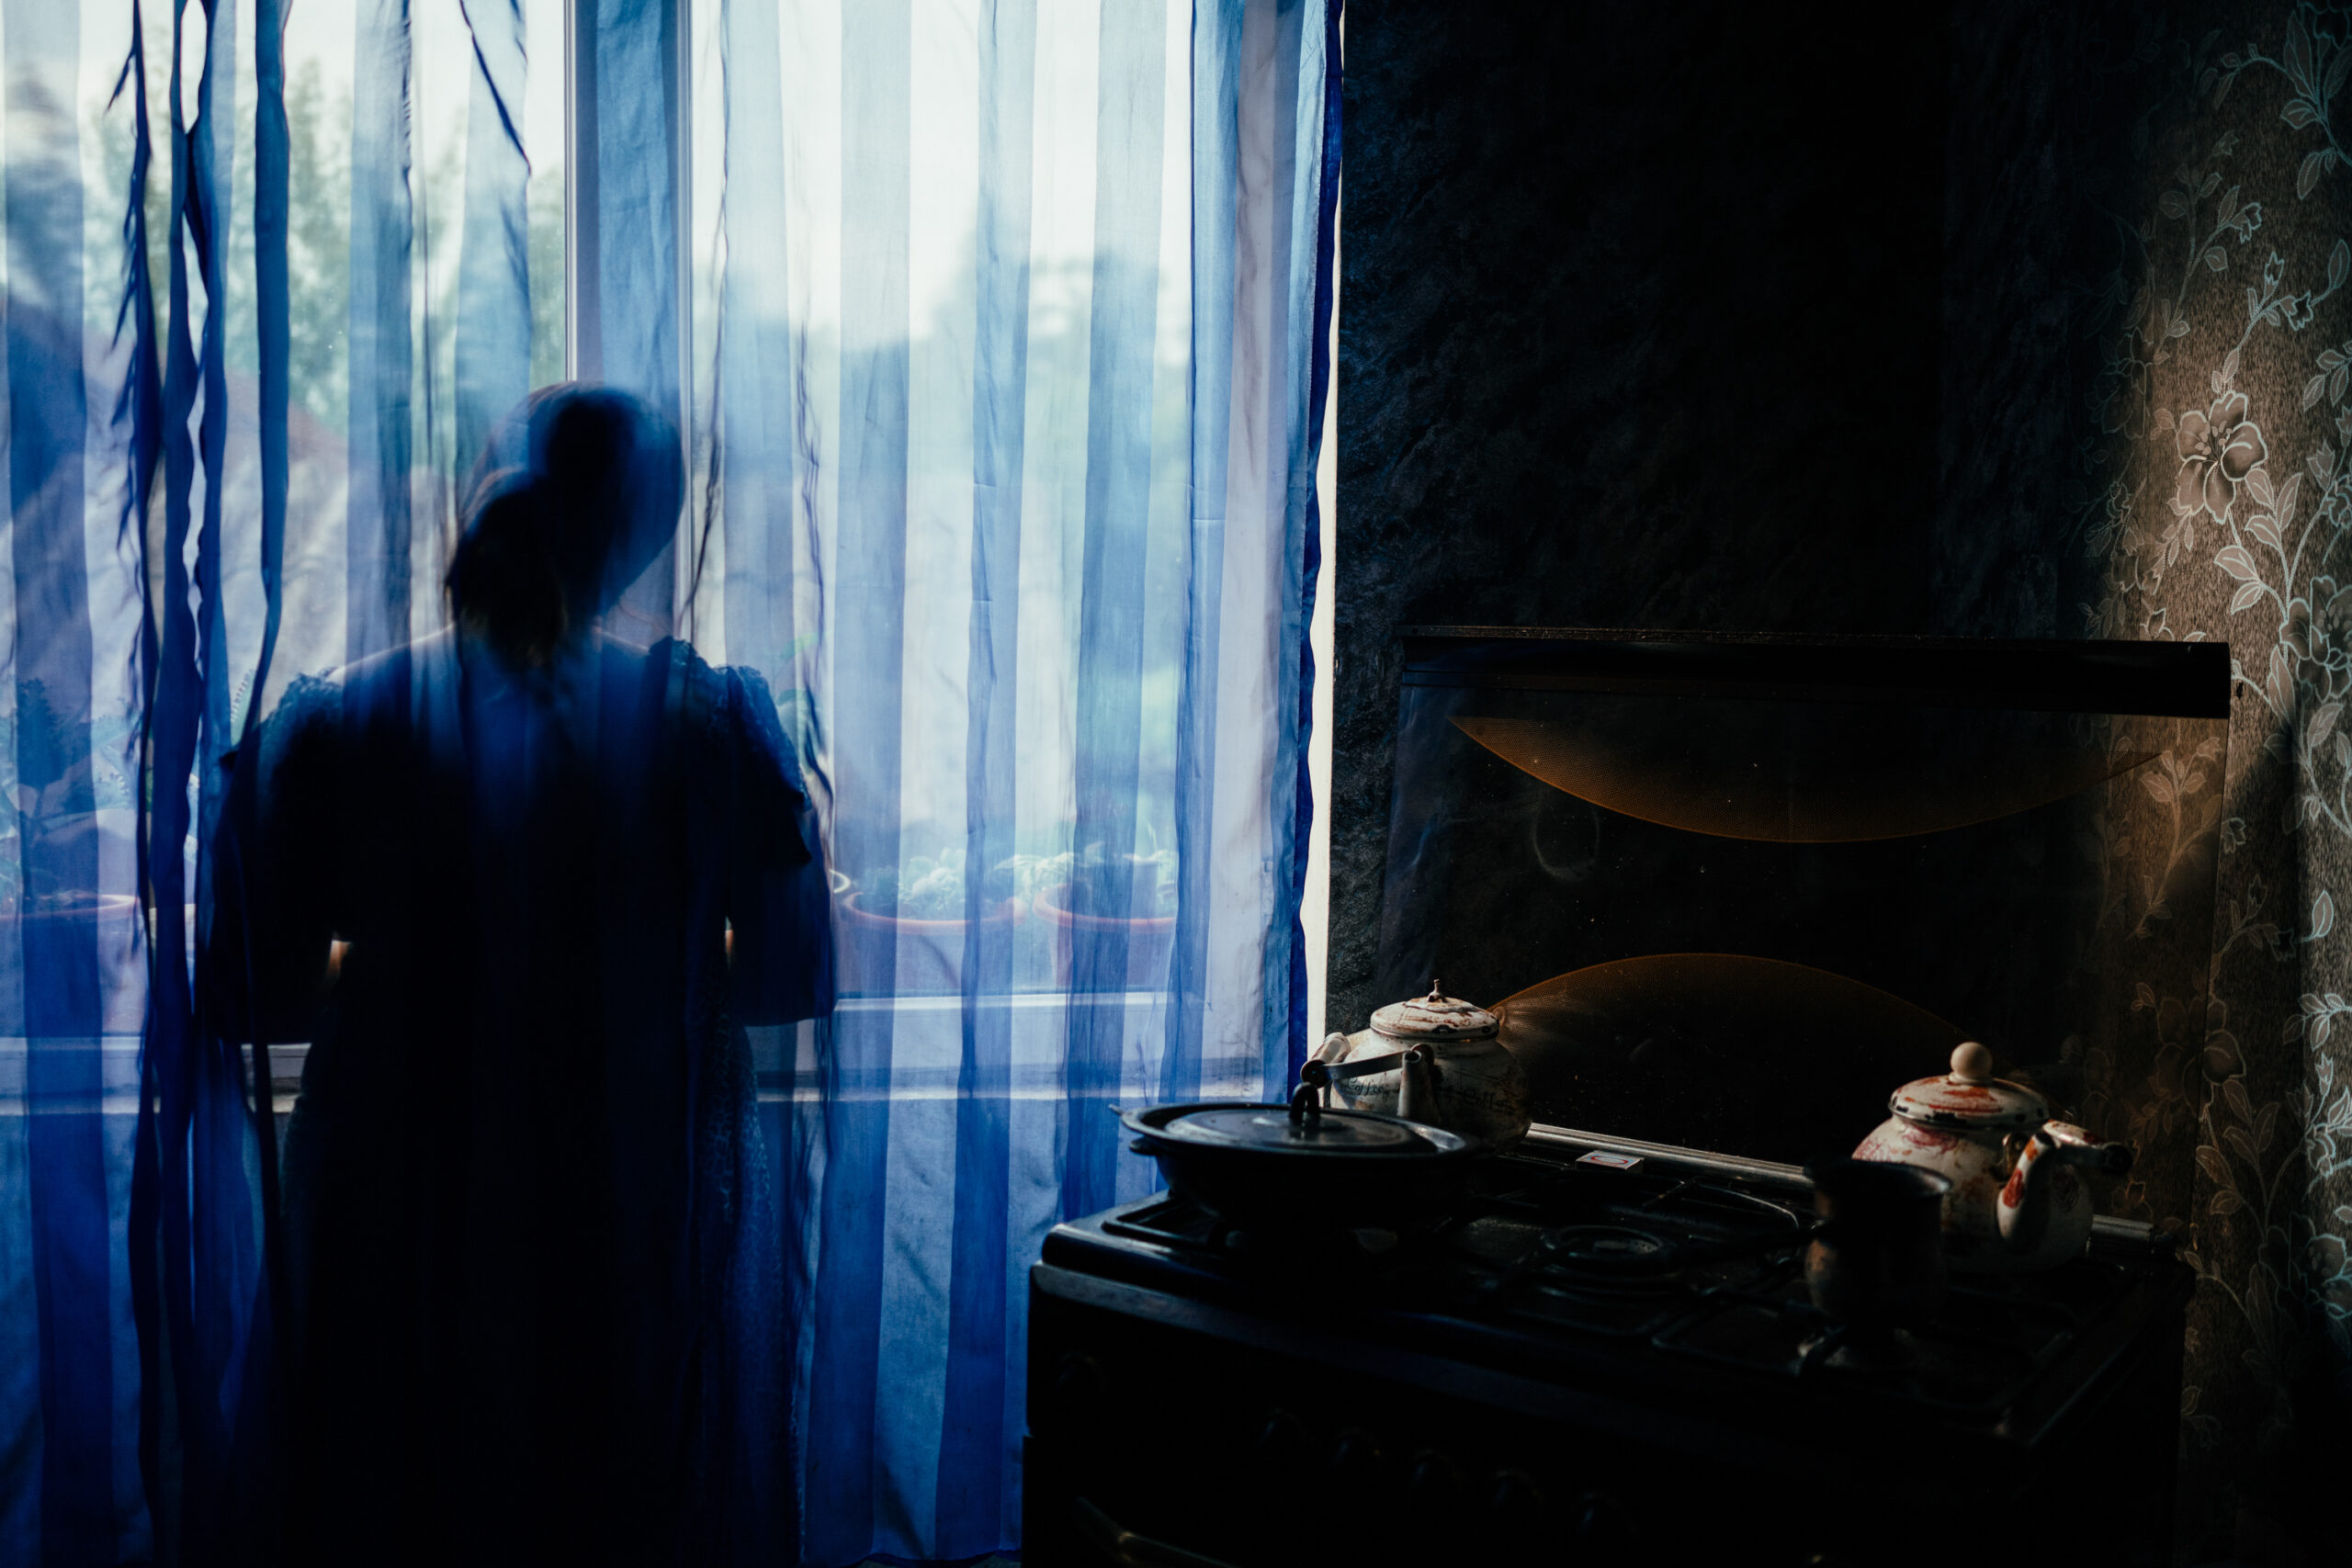 the silhouette of a person behind a curtain in a room